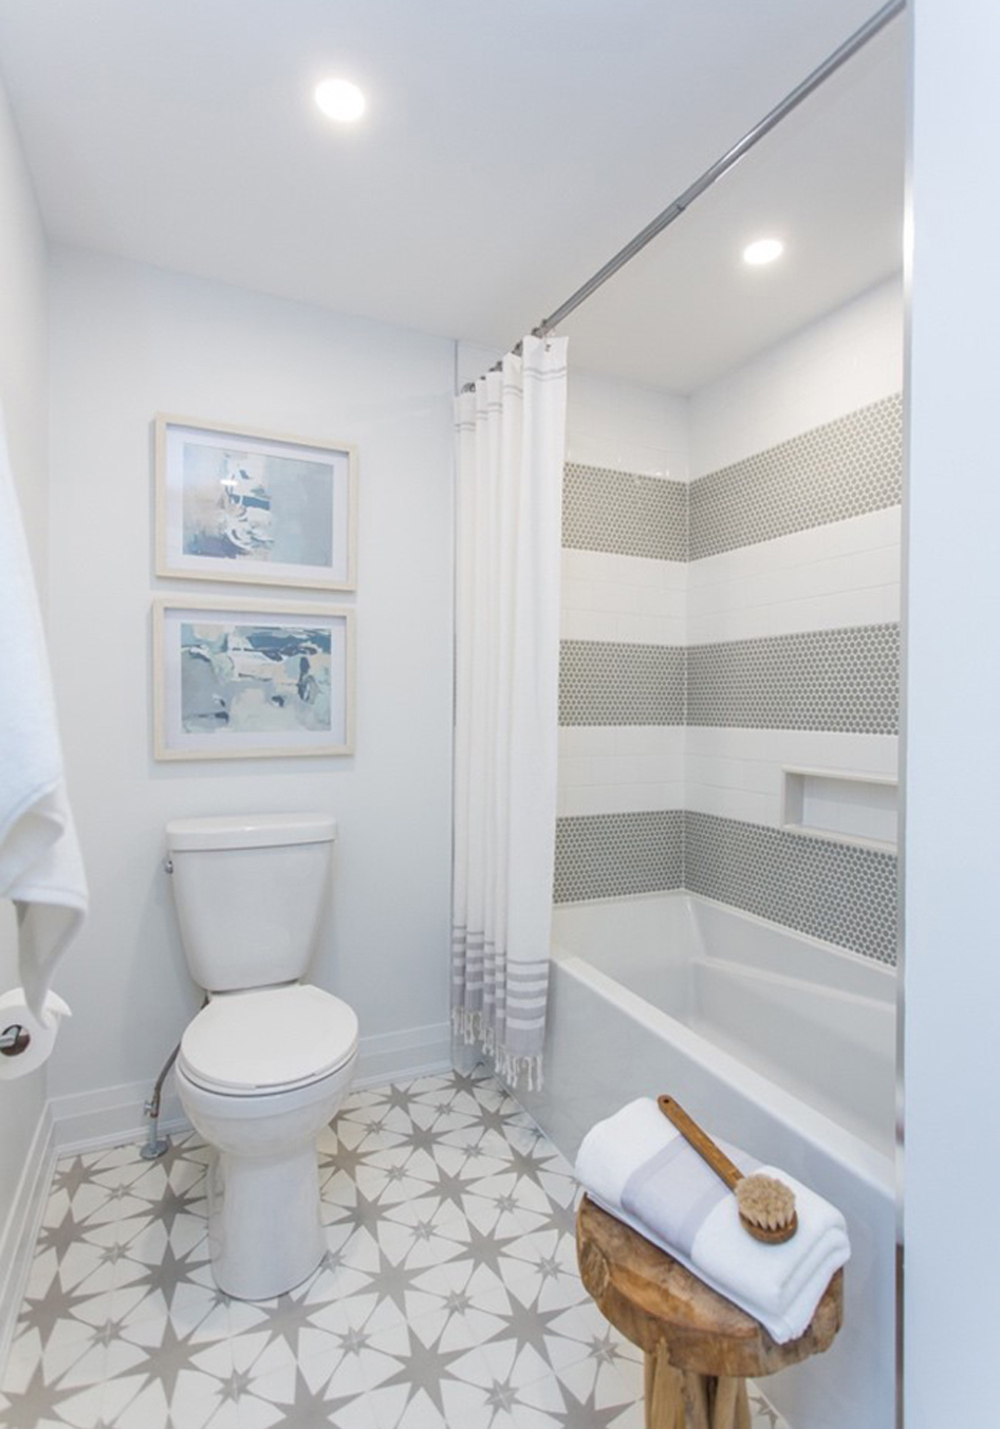 Small white bathroom with large grey star statement tile on the floor, a bathtub shower combo with small grey and white penny tiles, and two framed prints above a white toilet